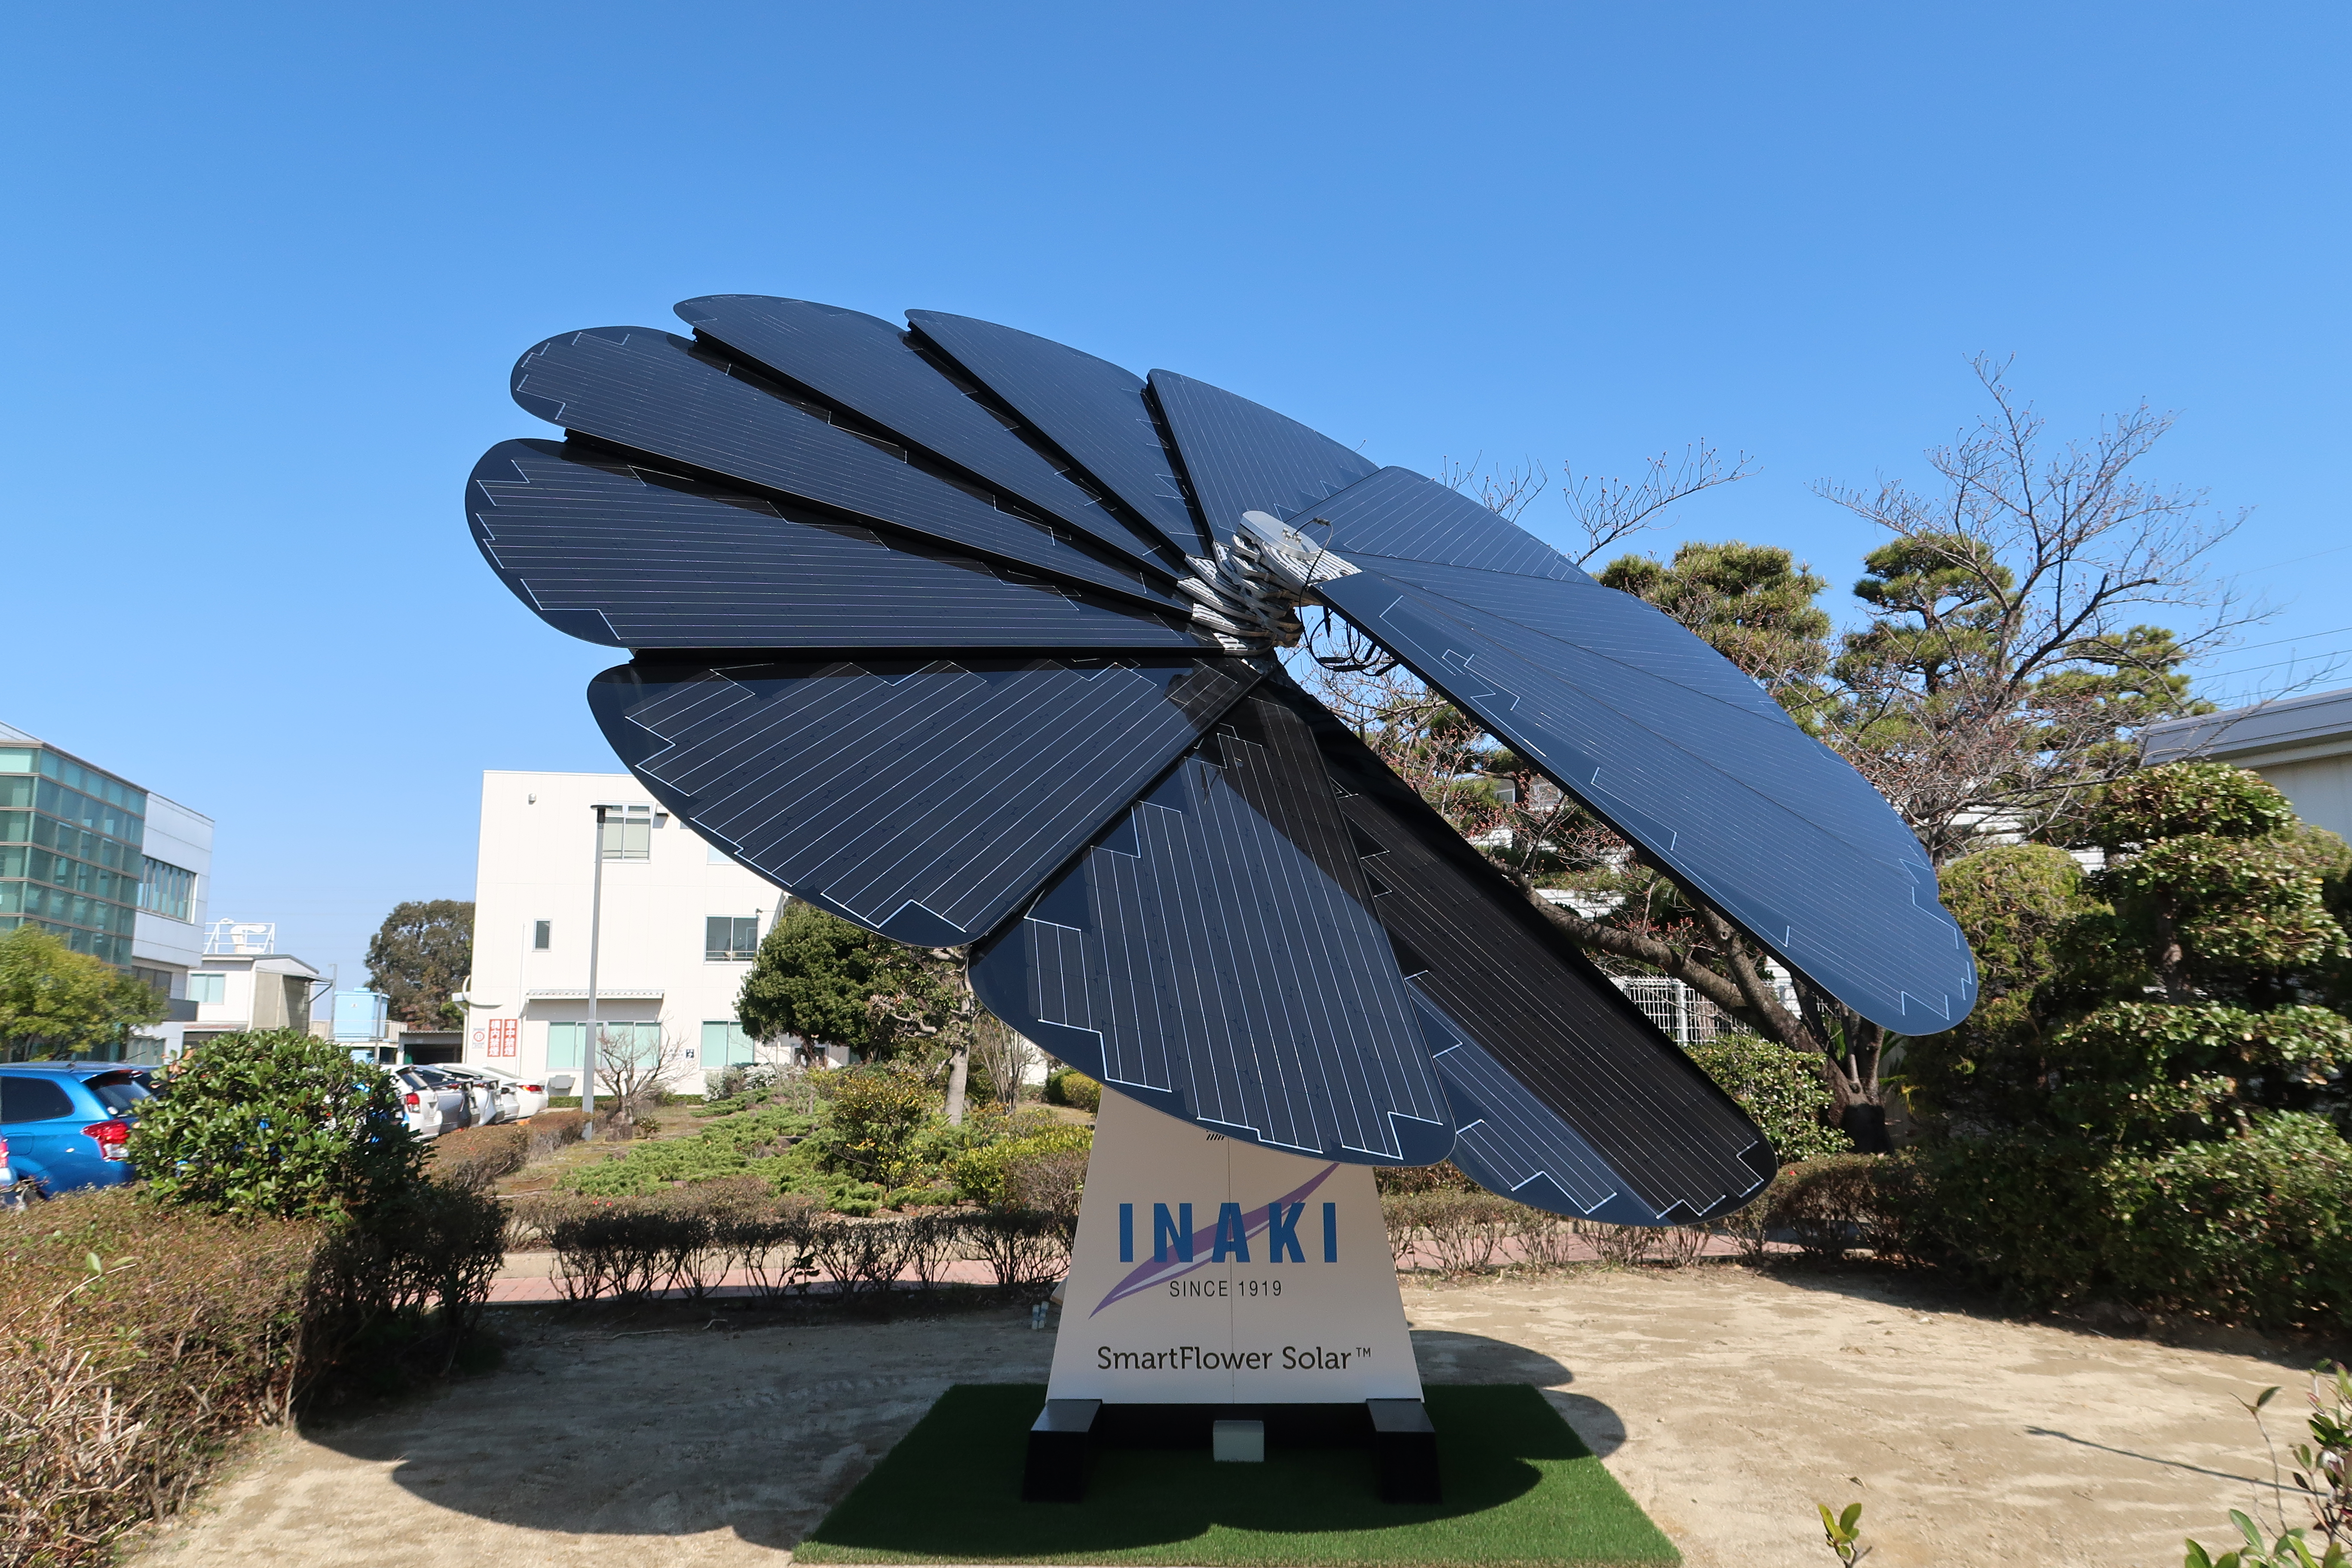 GomunoInaki Invests in Sustainable Development With Innovative SmartFlower  Solar Solution